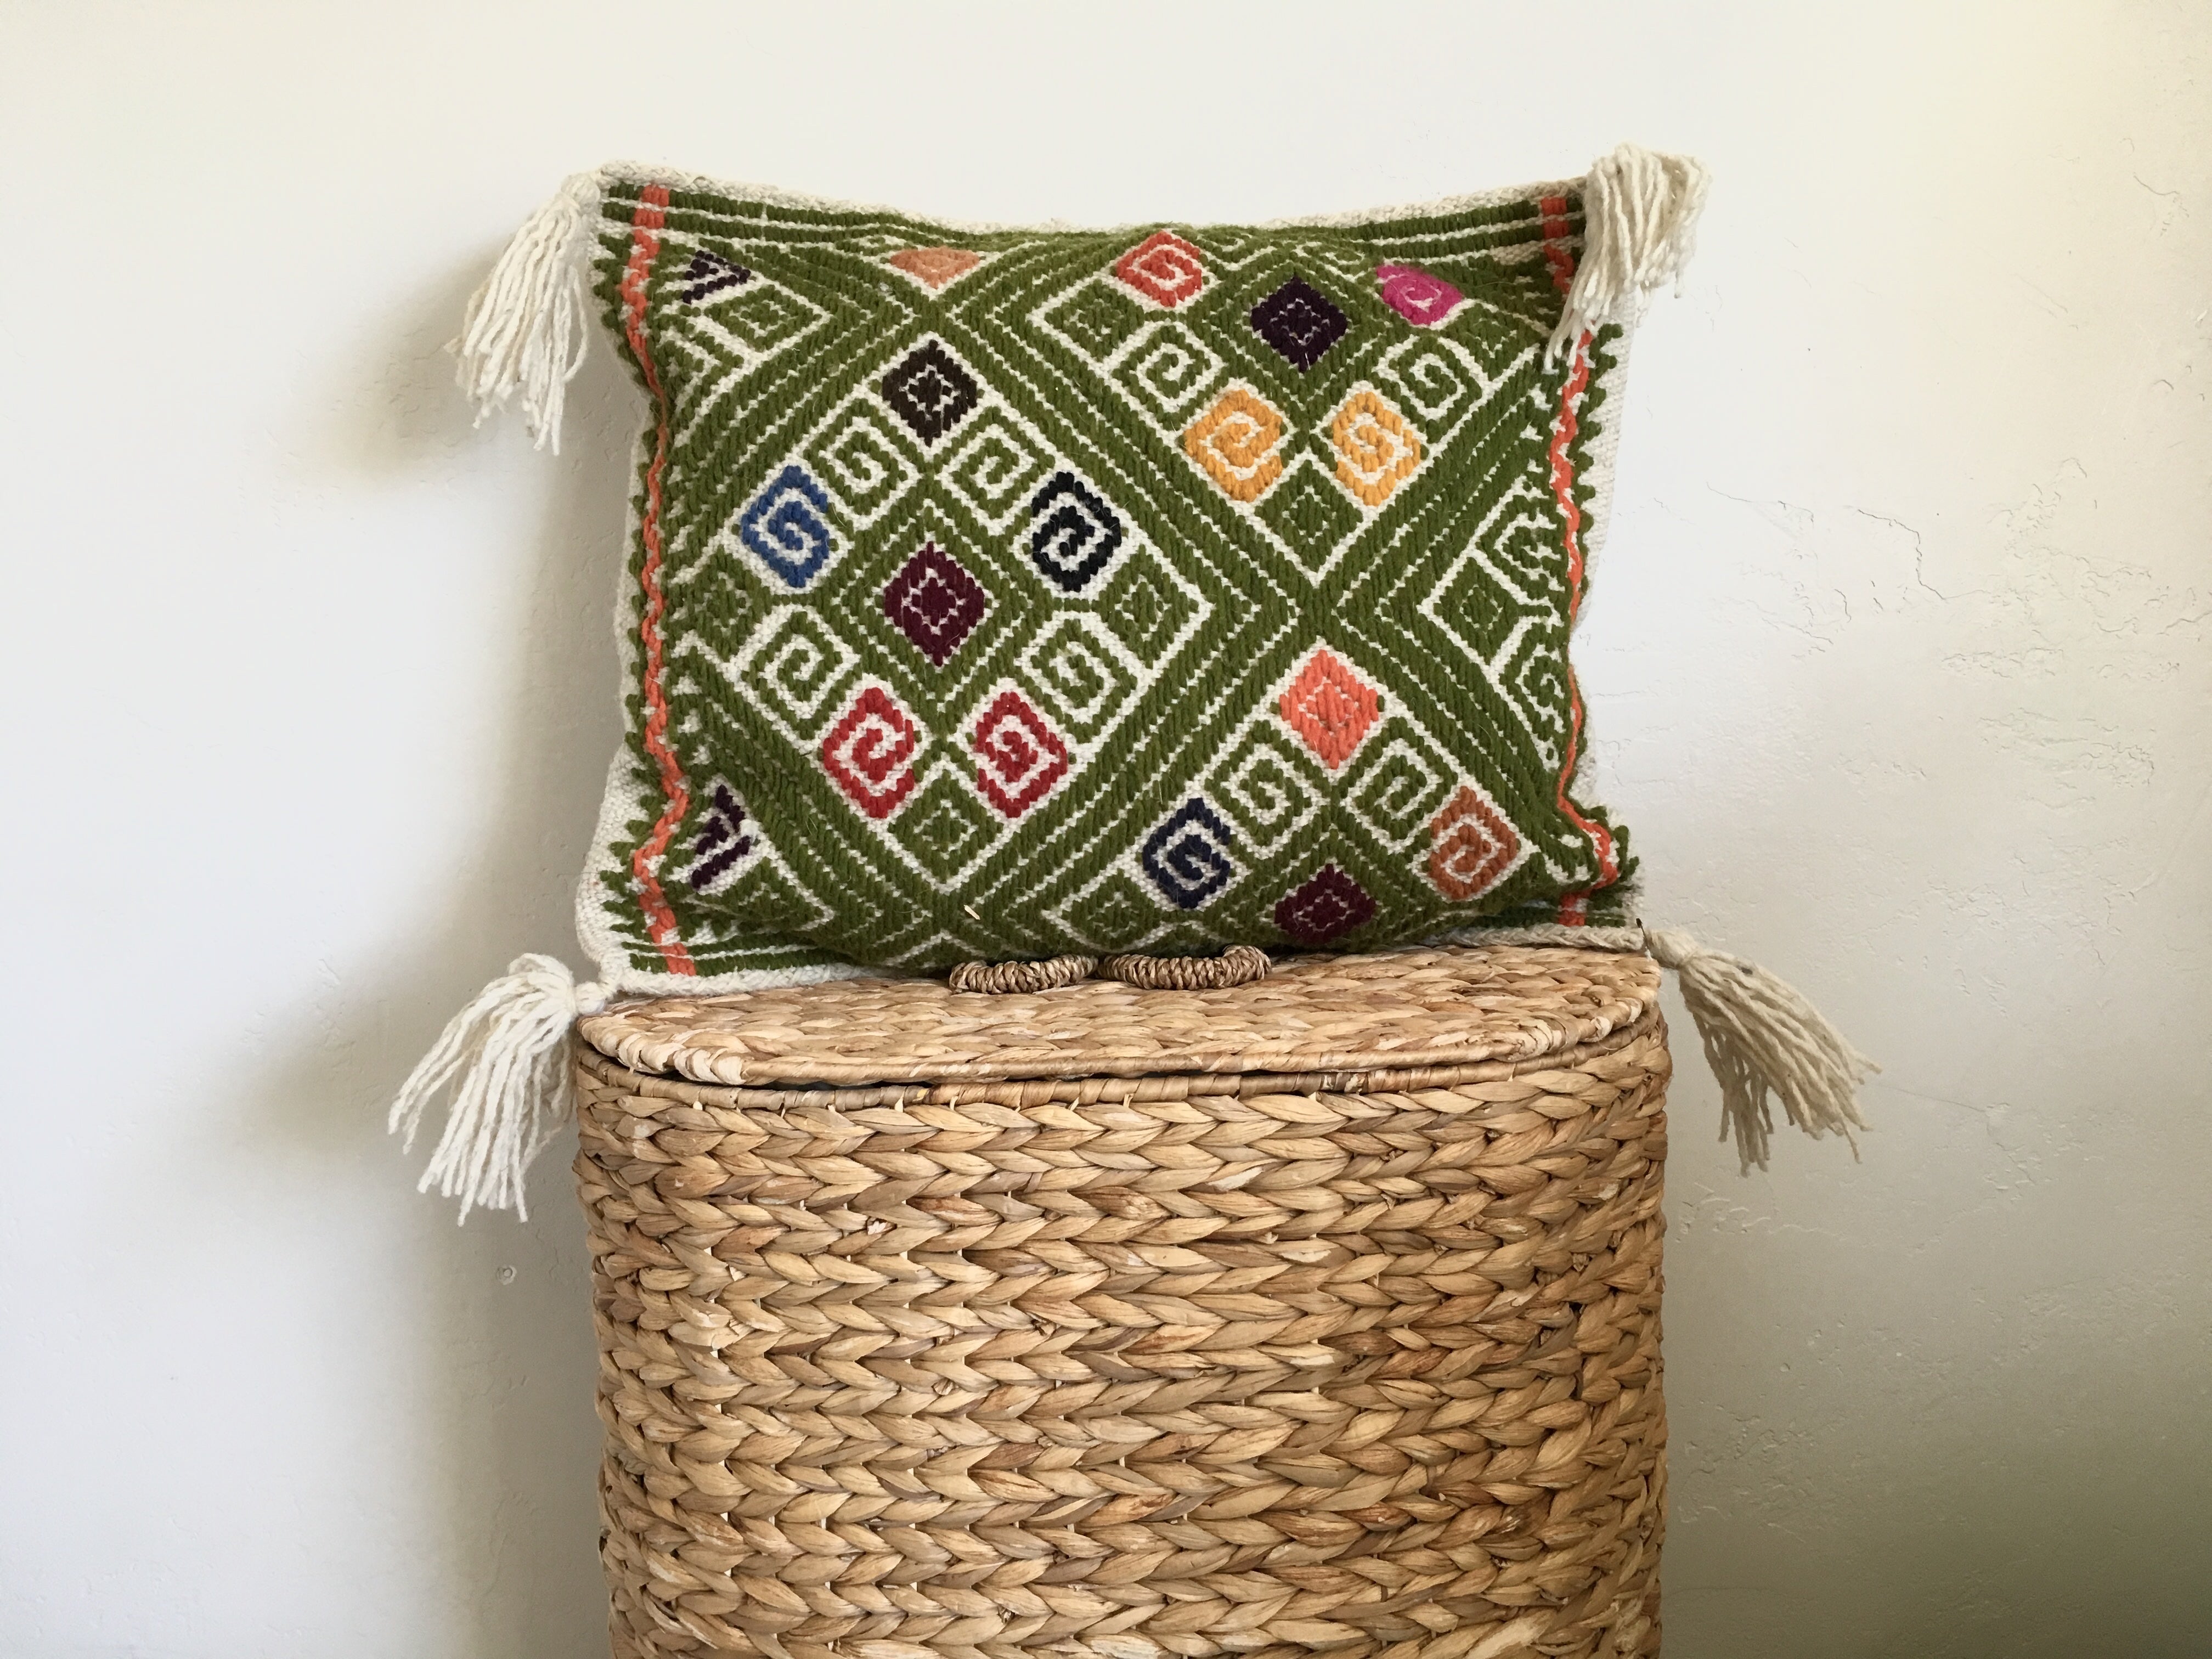 The Verde Pillow Cover